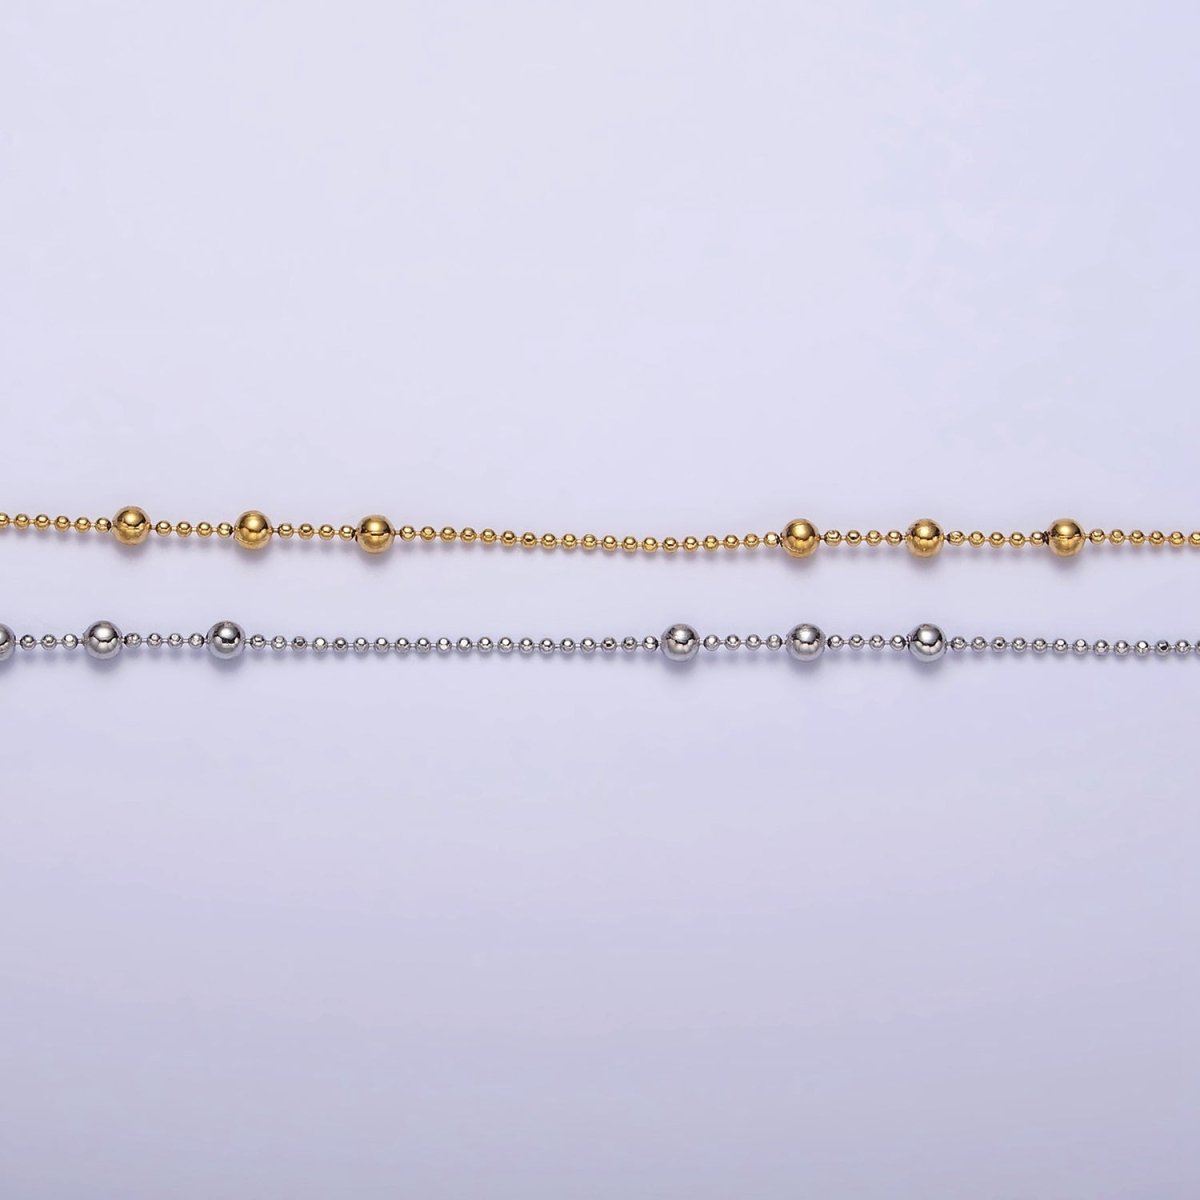 24k Gold Filled Beaded Satellite Chain Gold Filled Silver Chain Simple Everyday Layering Necklace 18 Inch | WA-1853 WA-1854 Clearance Pricing - DLUXCA